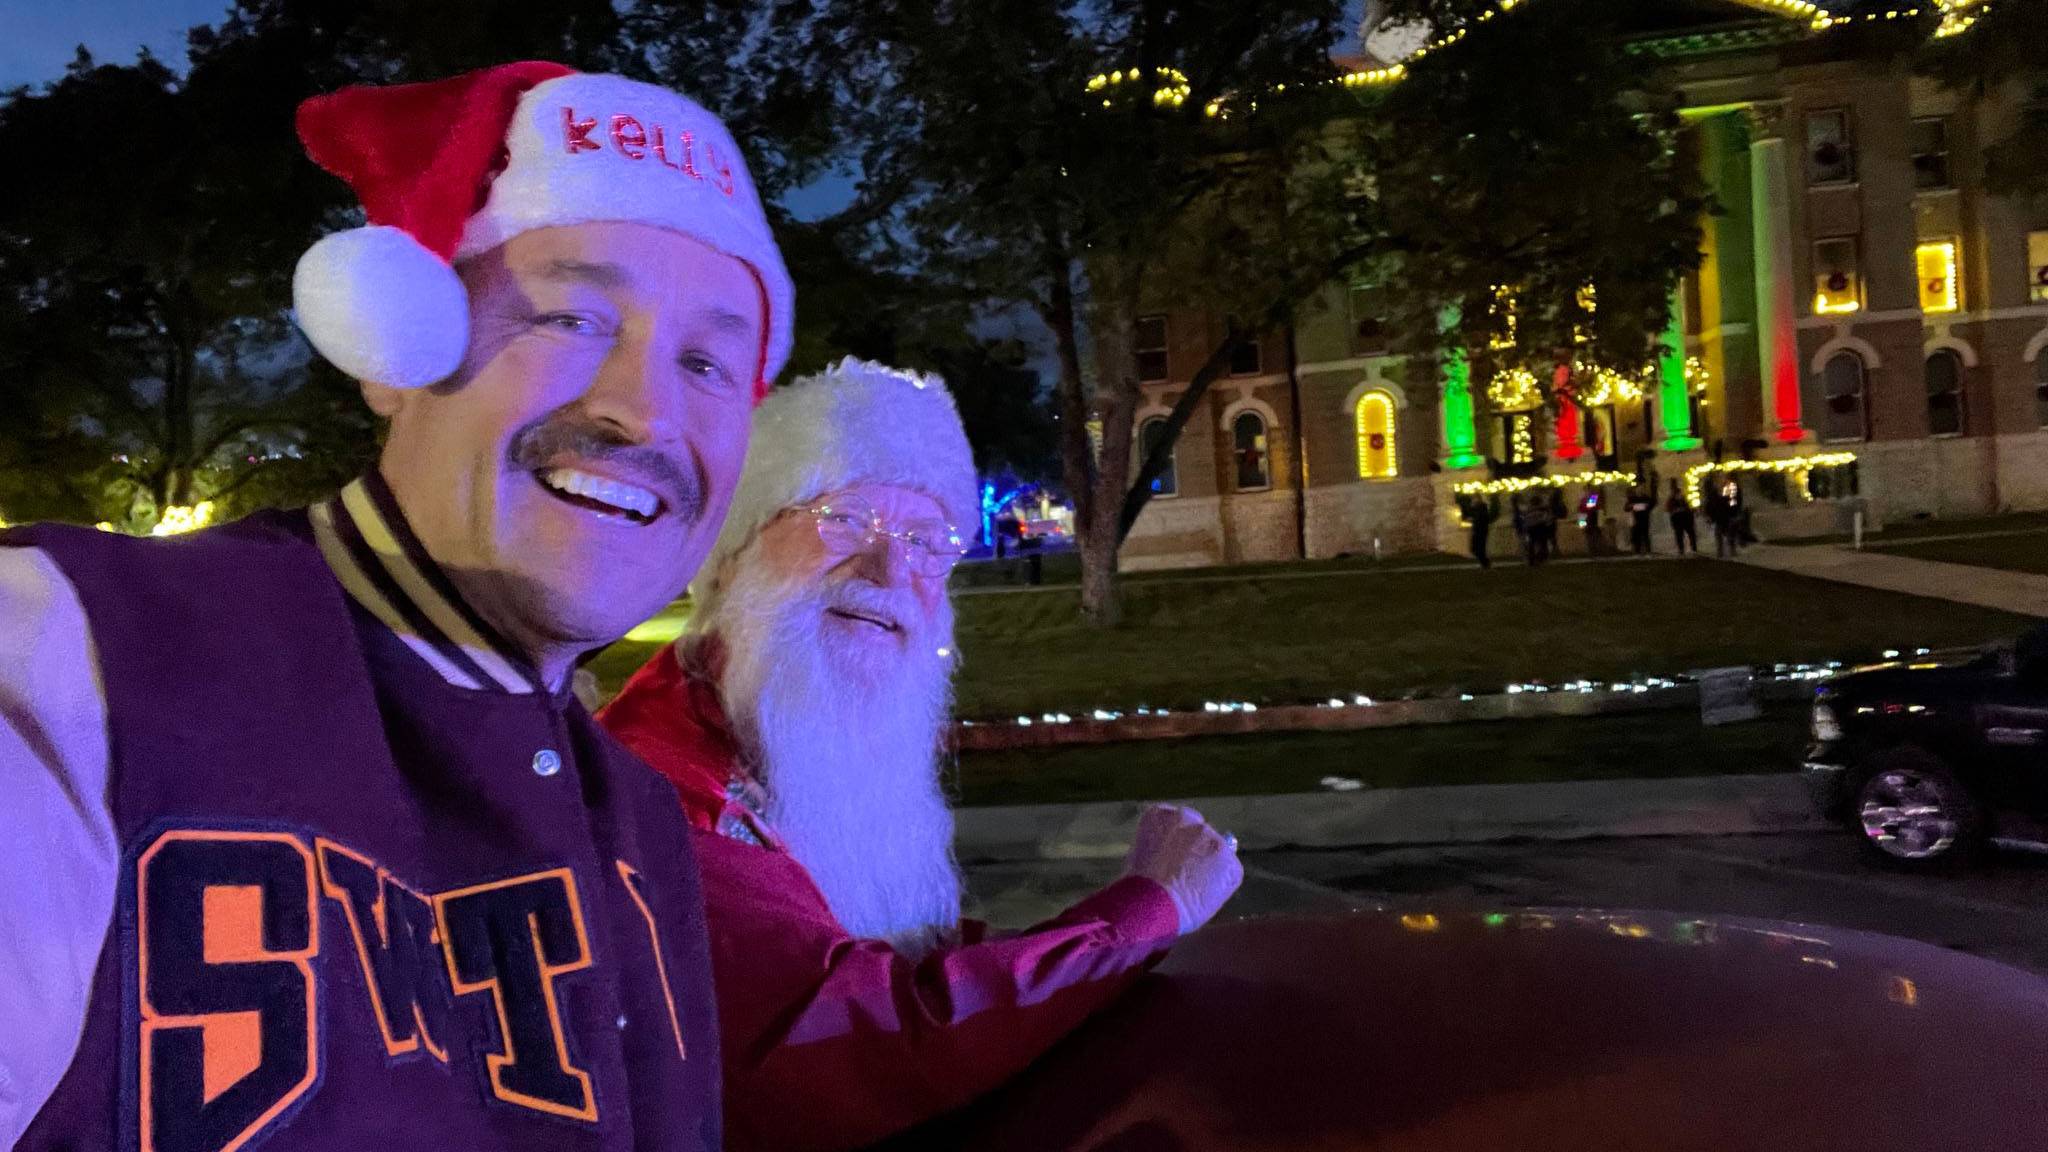 President Damphousse, left, poses for a photo with Santa on a car.